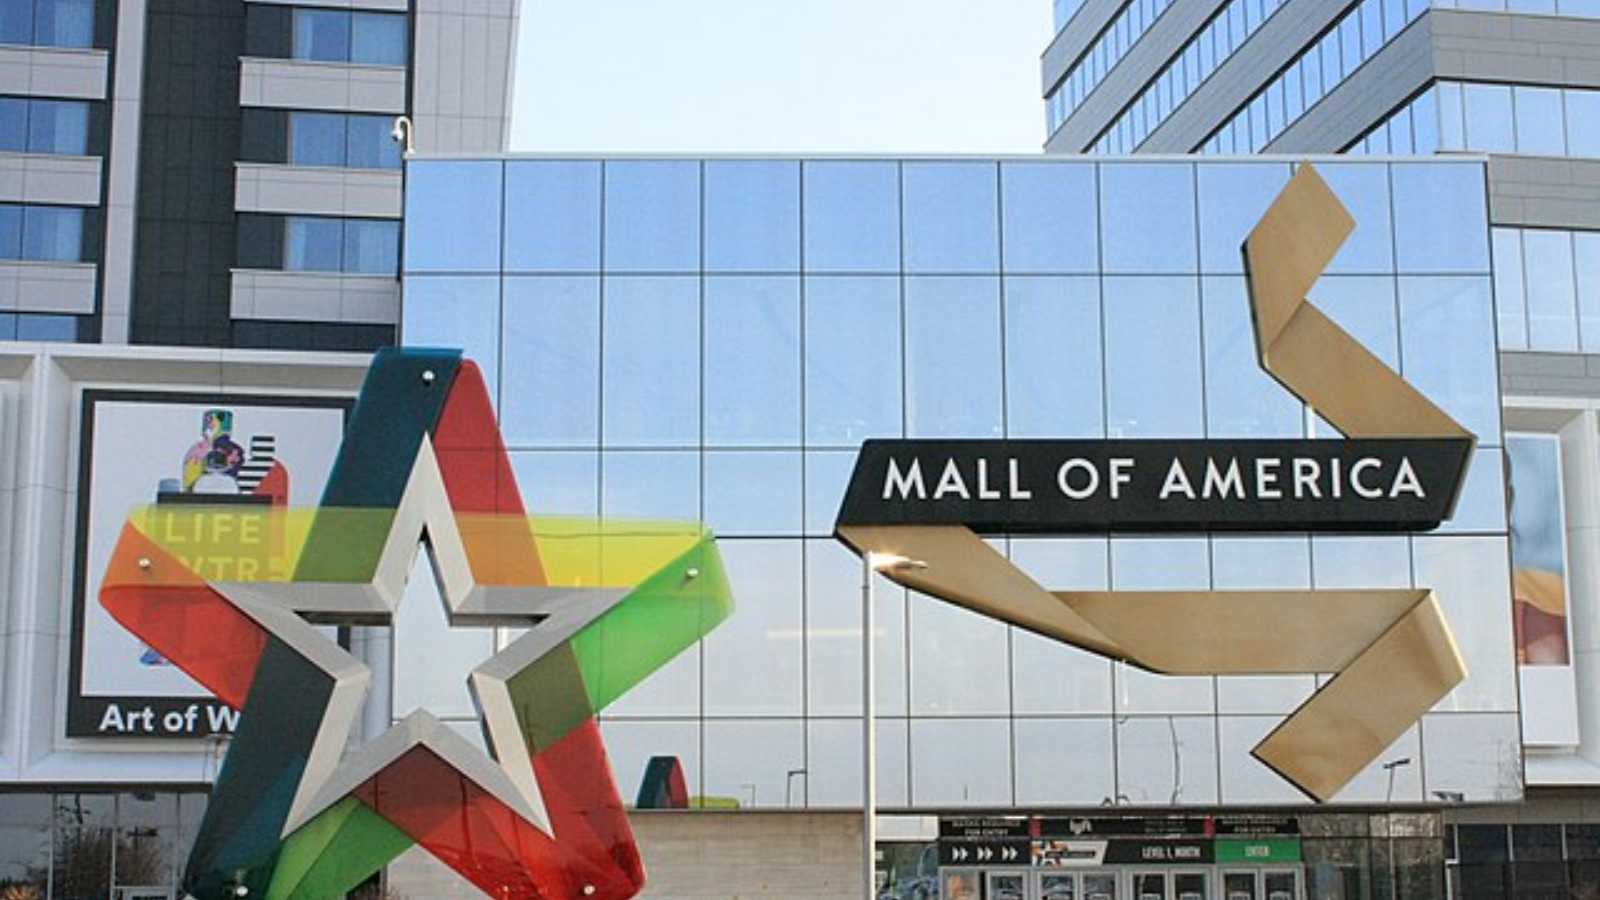 <p><span>It's big, bold, and full of the same stores you'll find anywhere else. Unless you enjoy walking miles indoors, the Mall of America may not be worth the detour.</span></p>